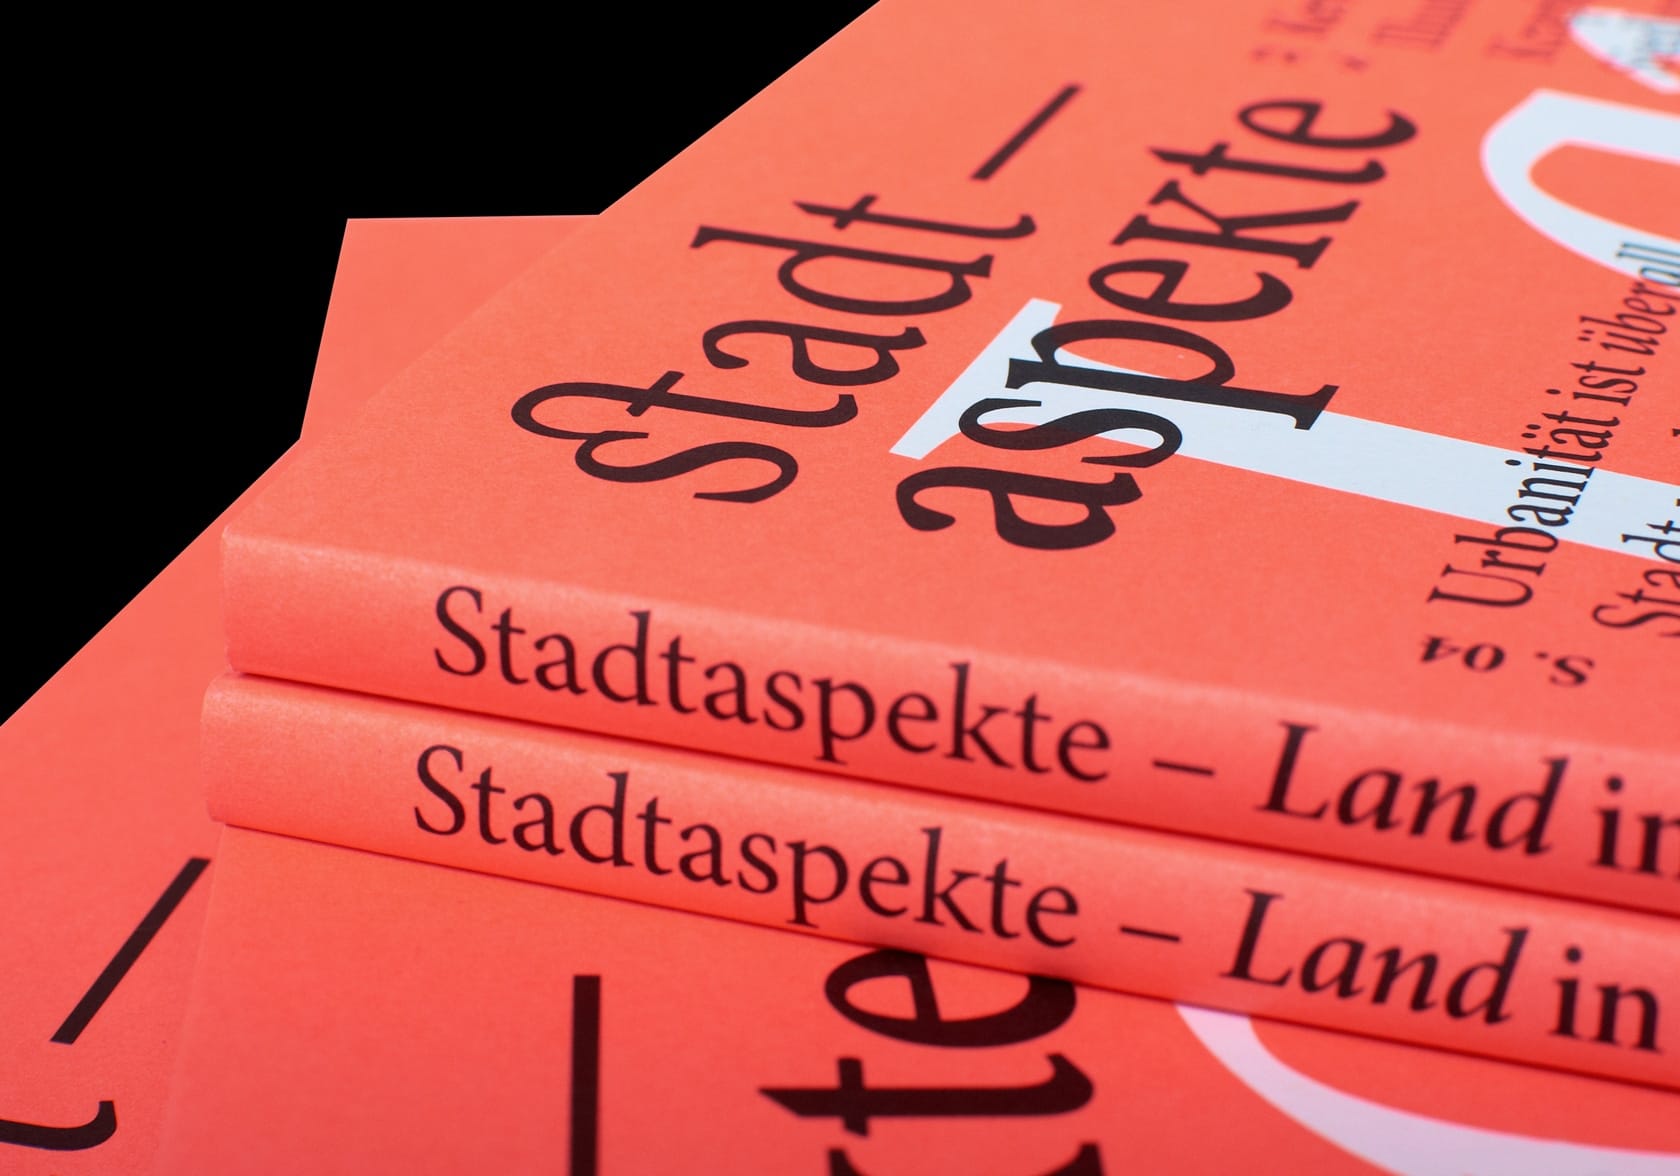 A detail shot of the cover of the 2nd special issue of Stadtaspekte